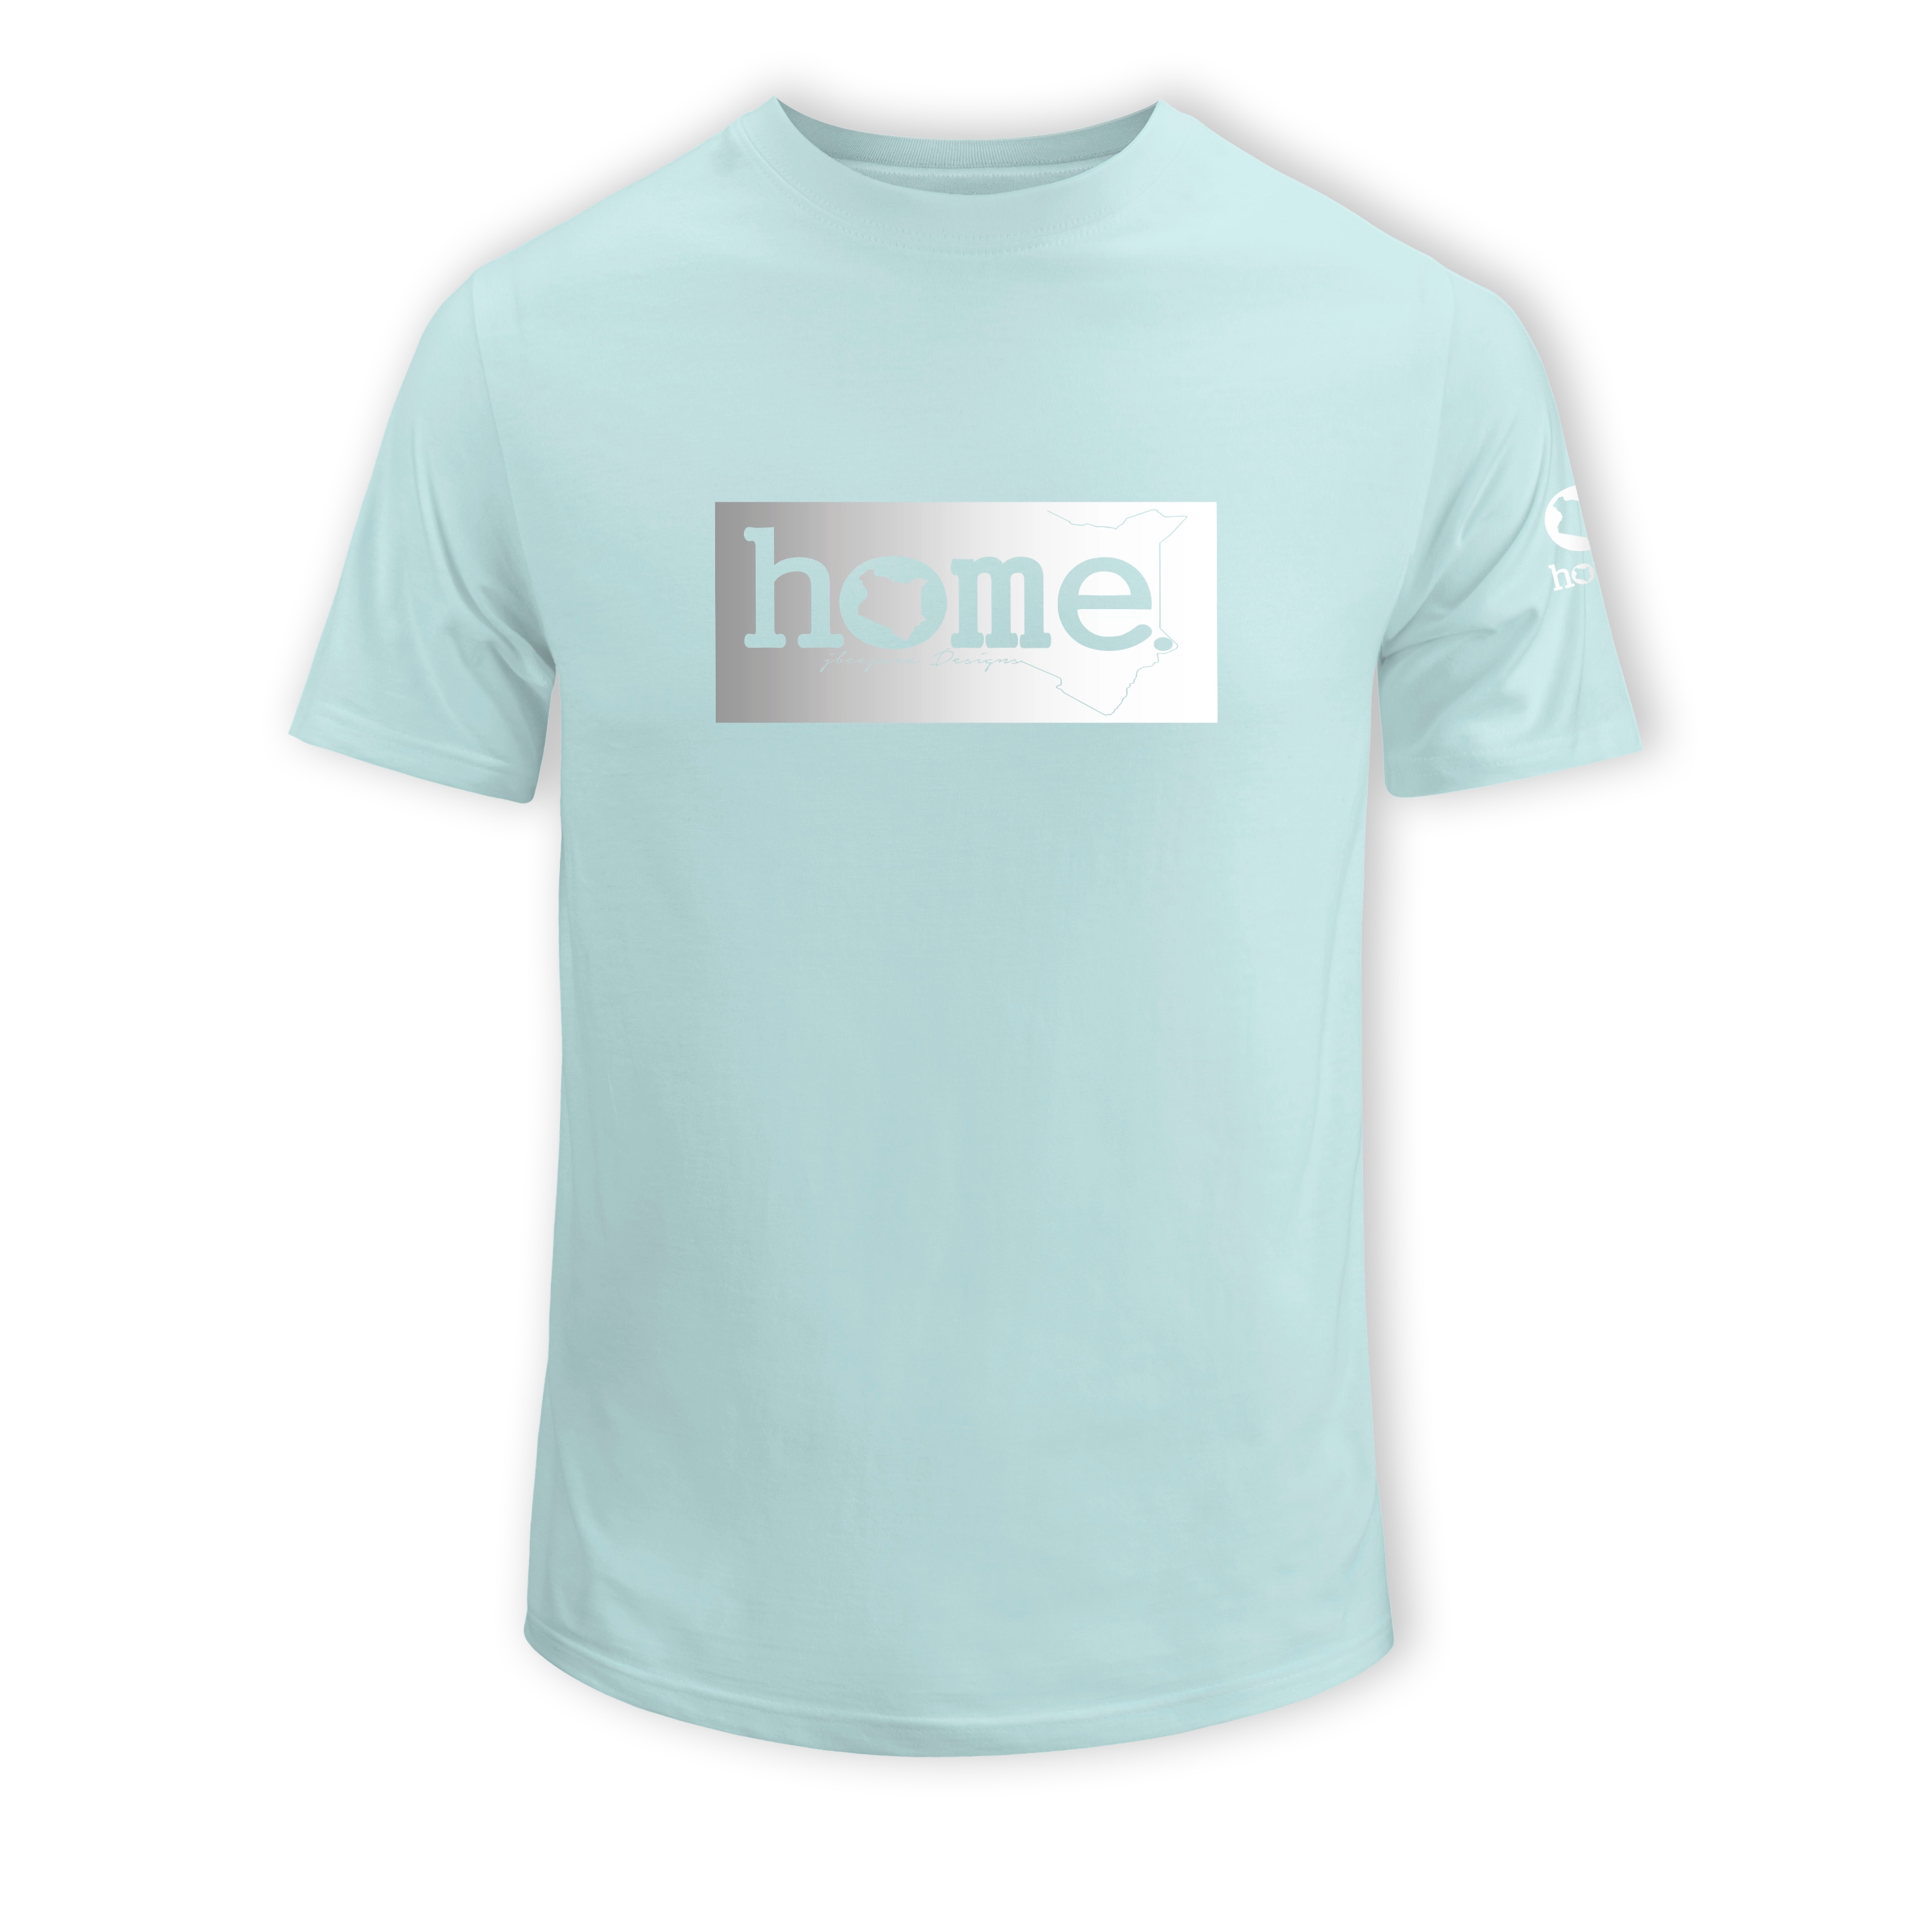 home_254 KIDS SHORT-SLEEVED MISTY BLUE T-SHIRT WITH A SILVER CLASSIC PRINT – COTTON PLUS FABRIC